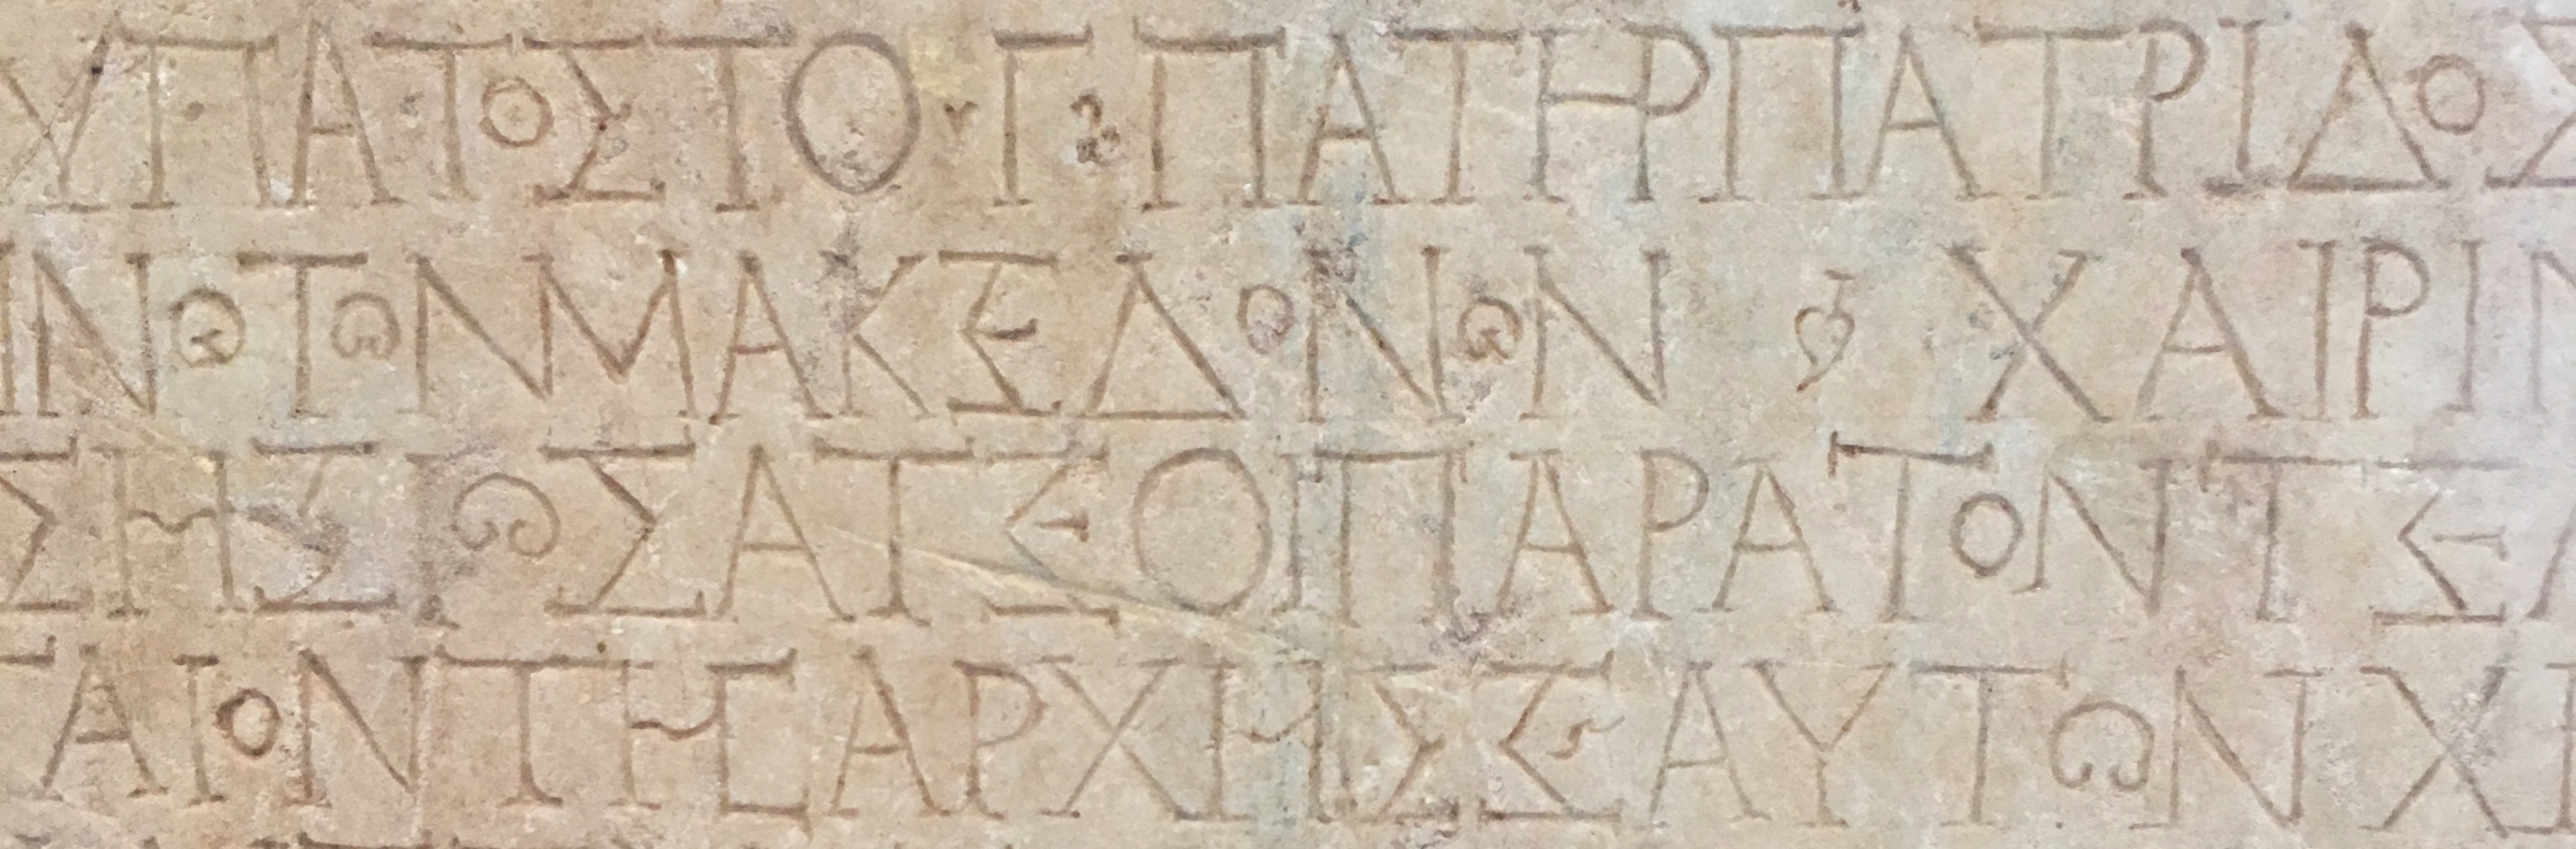 Photographic detail of the tablet described in this post. Line after line of ancient Greek words carved into white stone.